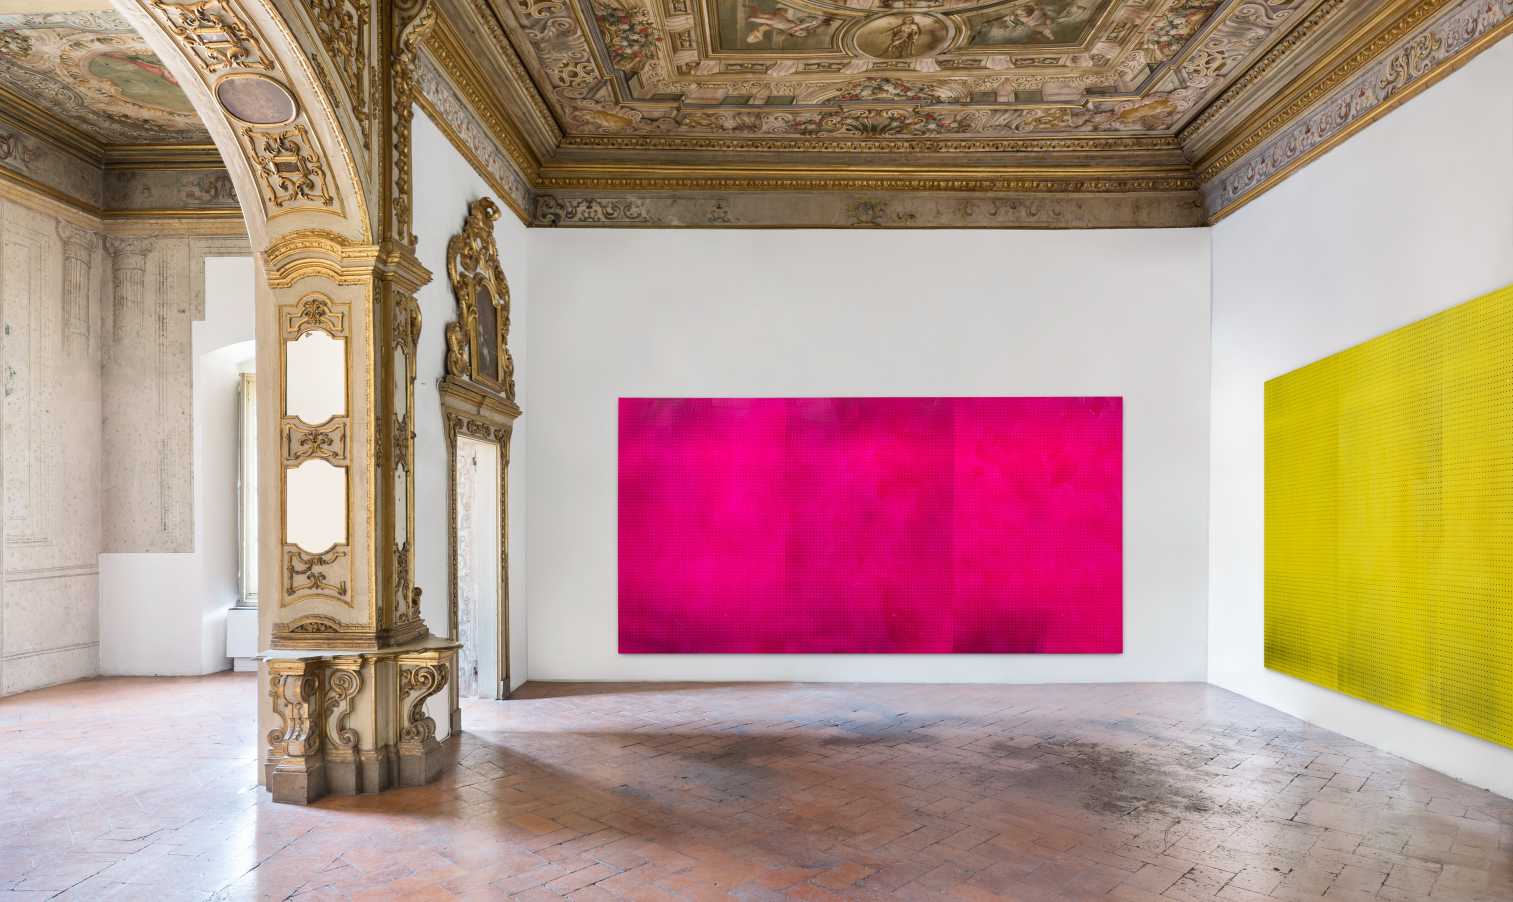 From L to R: « Untitled ( flash magenta ) », 2020.Acrylic and silkscreen ink on canvas. 78 x 150.5 in. (198.1 x 382 cm)
« Untitled ( flash yellow ) », 2019.Acrylic and silkscreen ink on canvas. 78 x 306 in. (198.1 x 722.2 cm)
